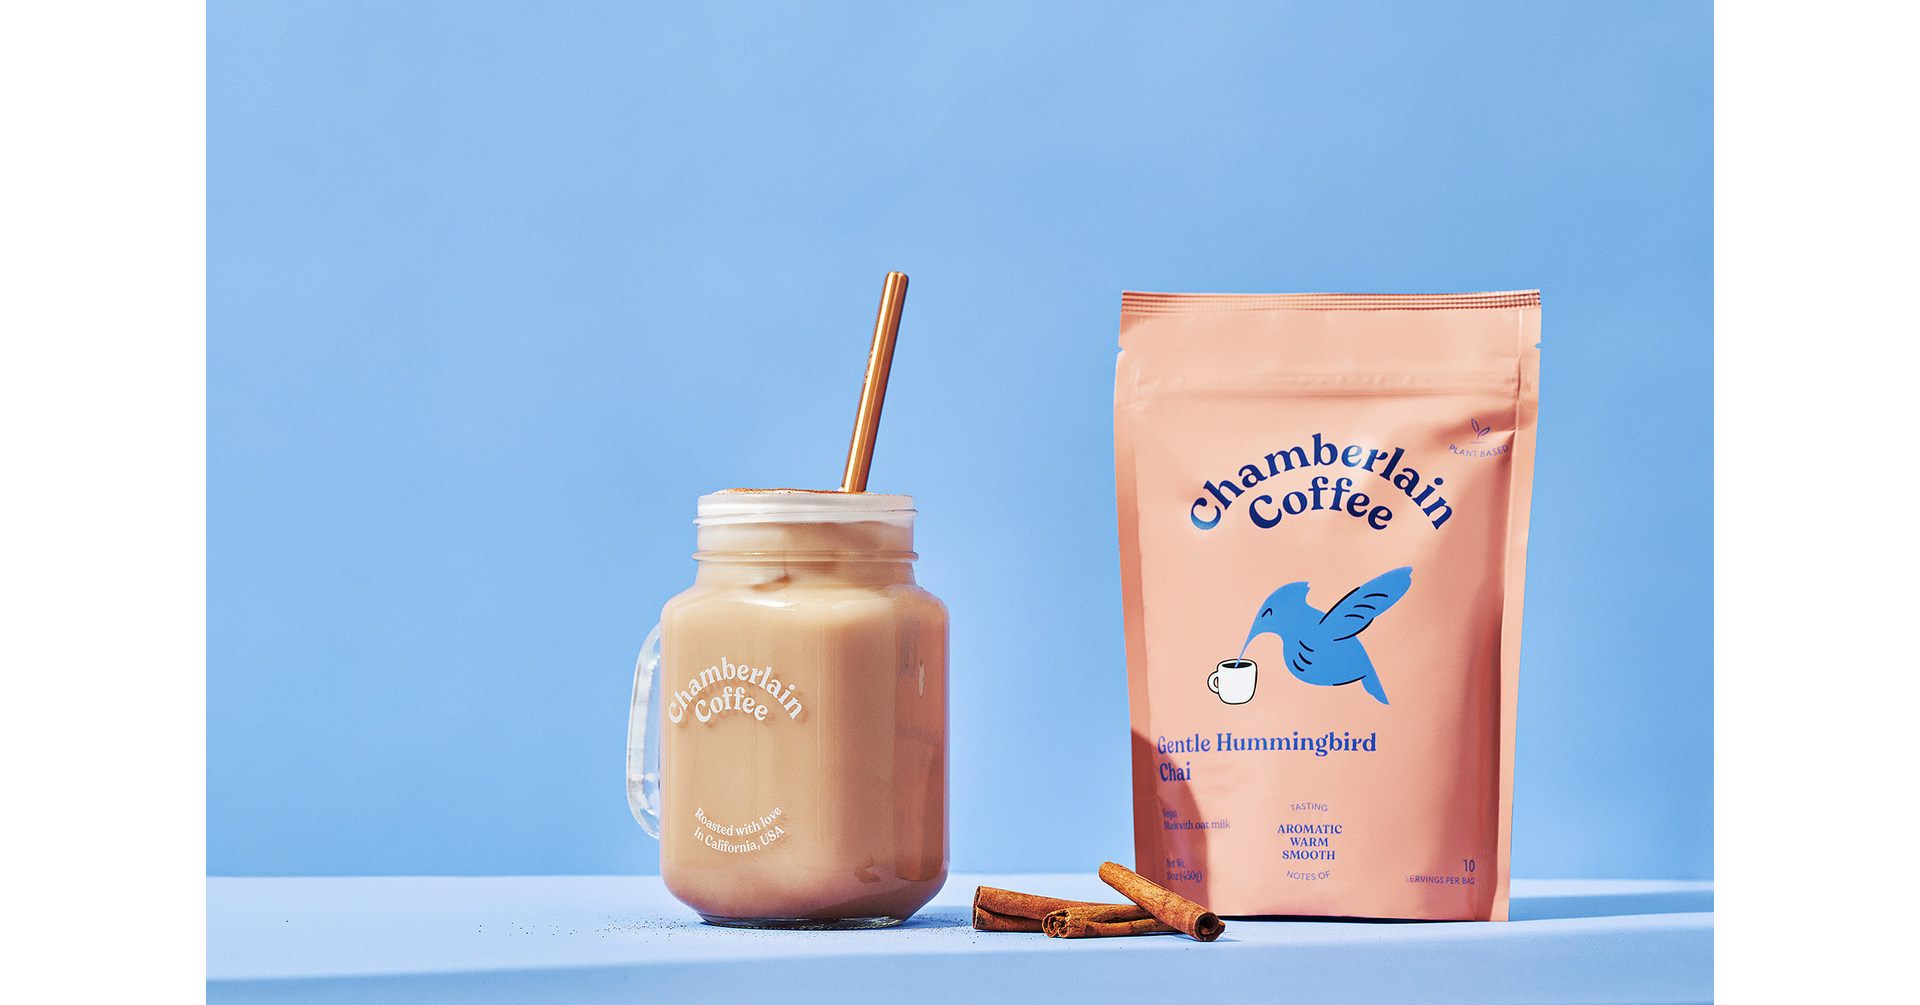 Chamberlain Coffee partners with OSMO Salt to give us flavored salts